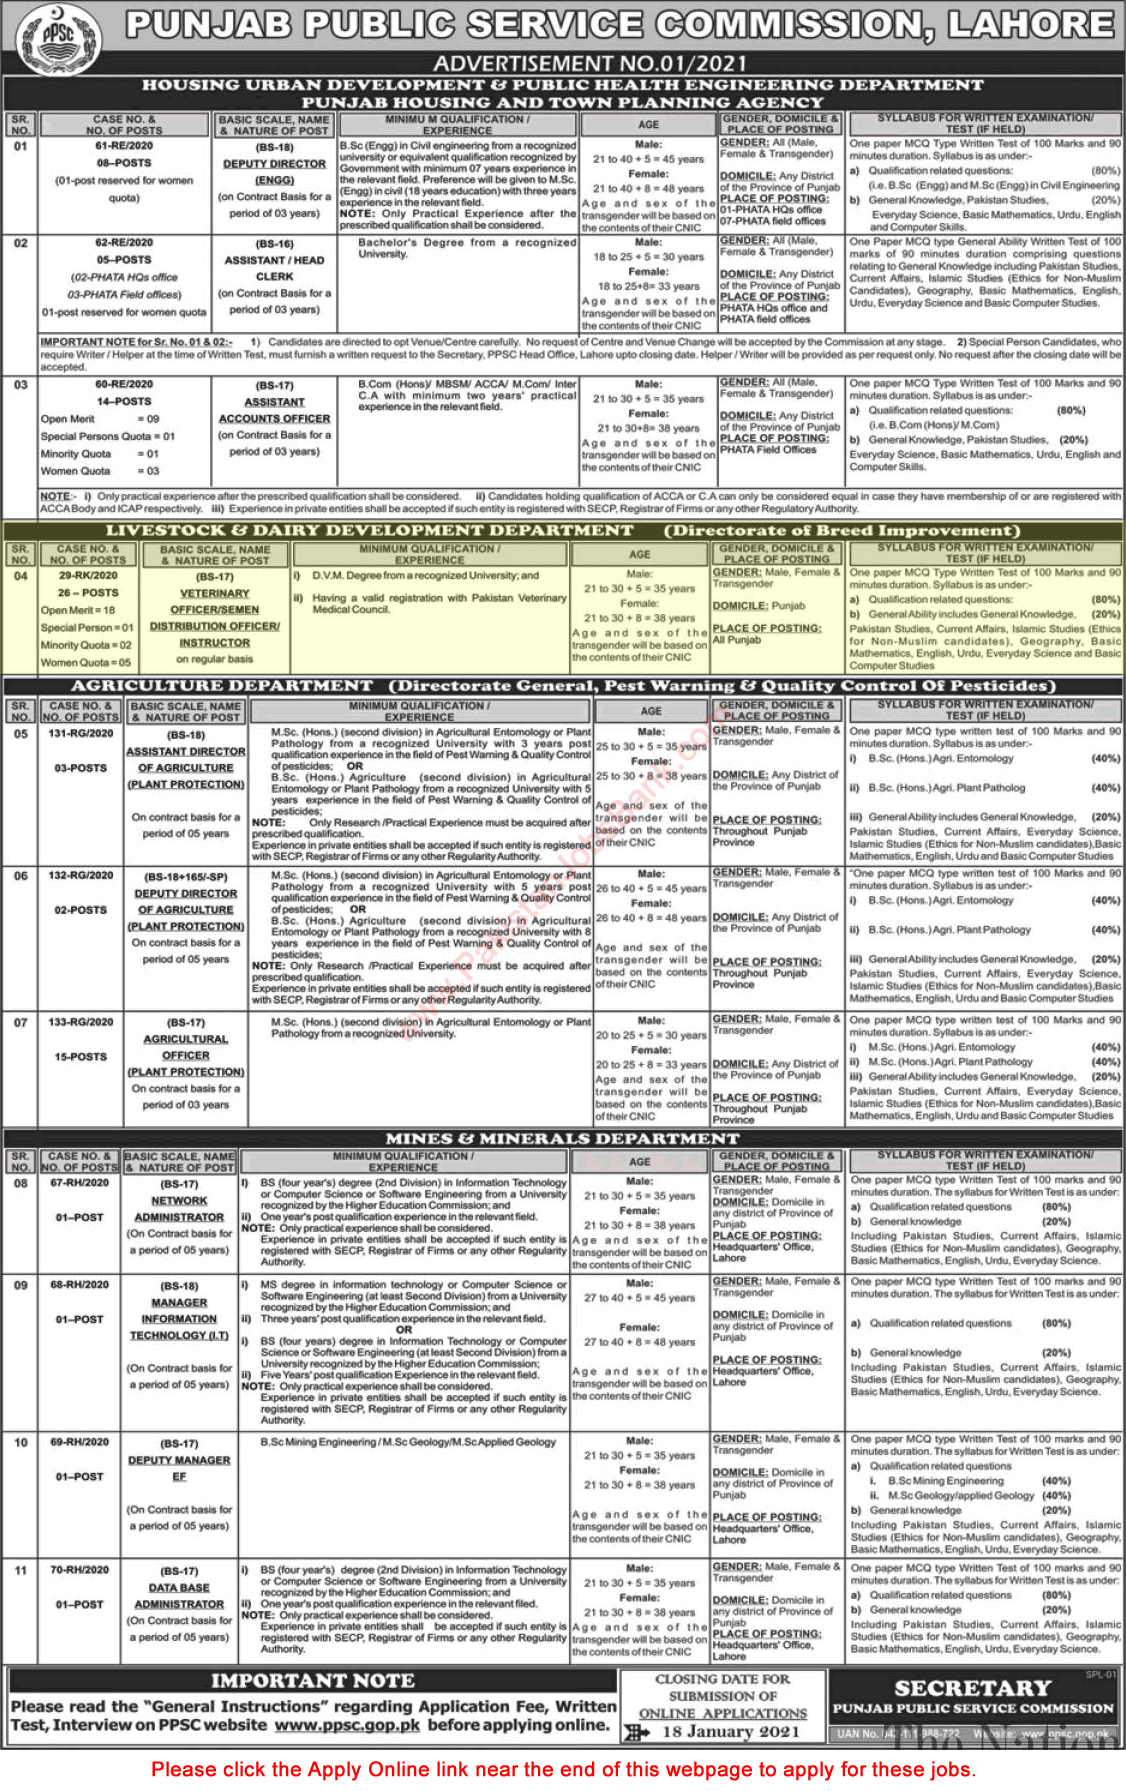 Veterinary Officer Jobs in Livestock and Dairy Development Department Punjab 2021 PPSC Apply Online Latest